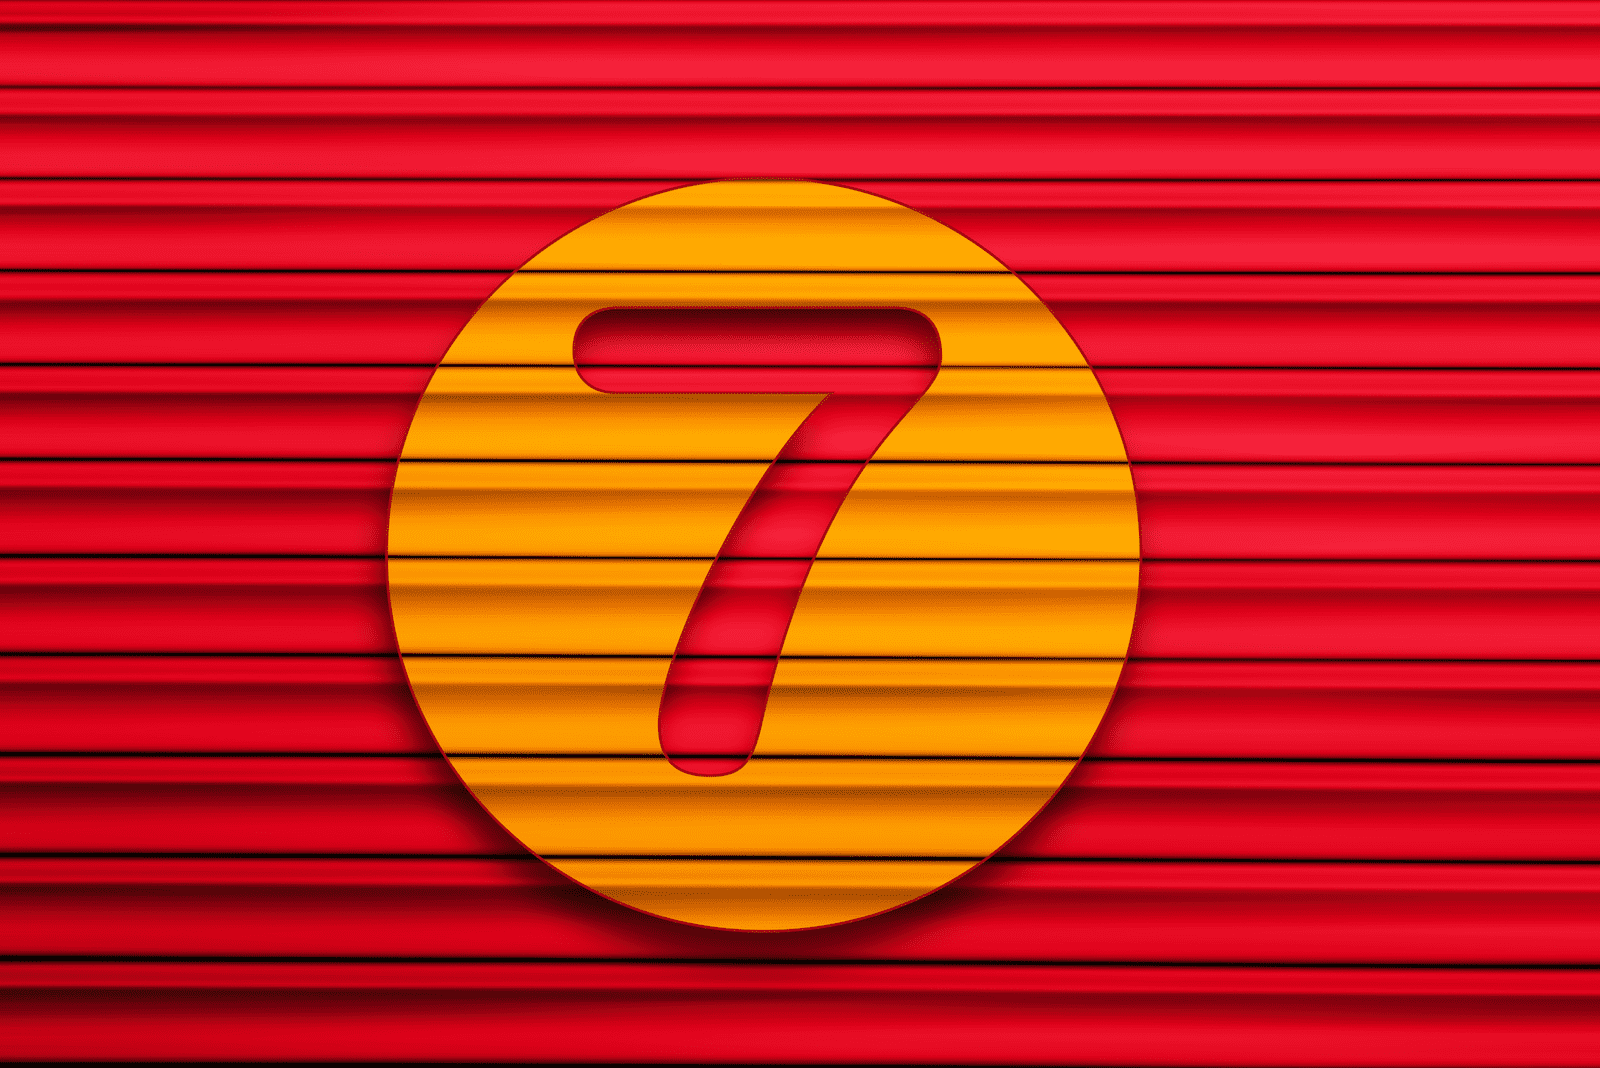 number 7 on a red background